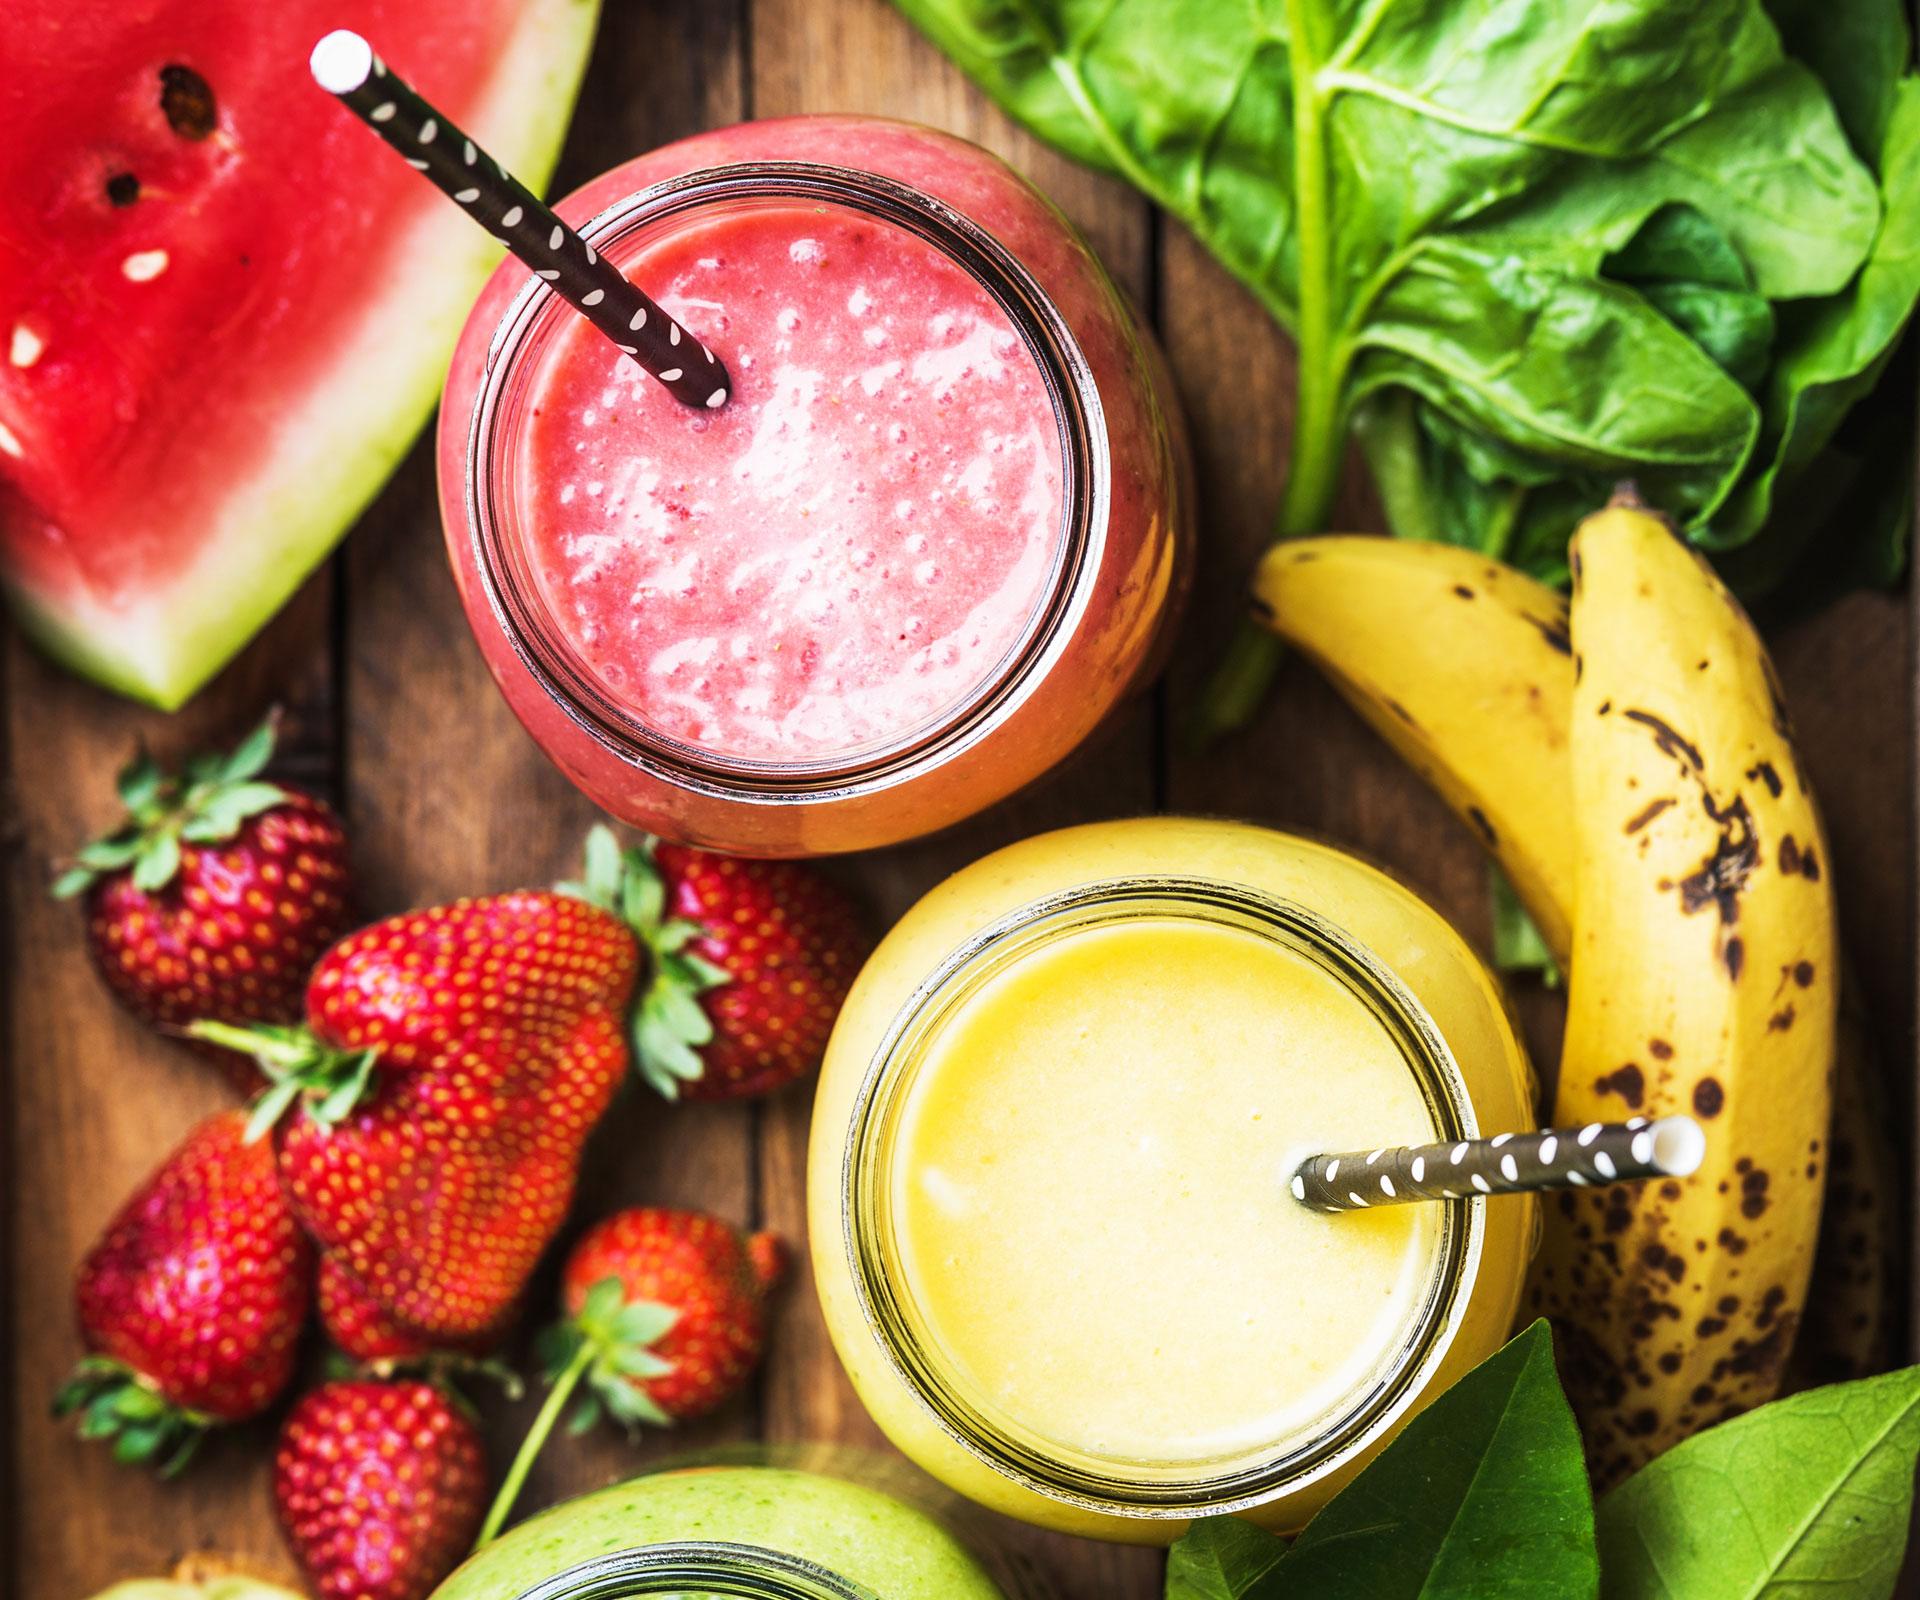 Dr Rich’s nutritious skin-boosting smoothie recipe